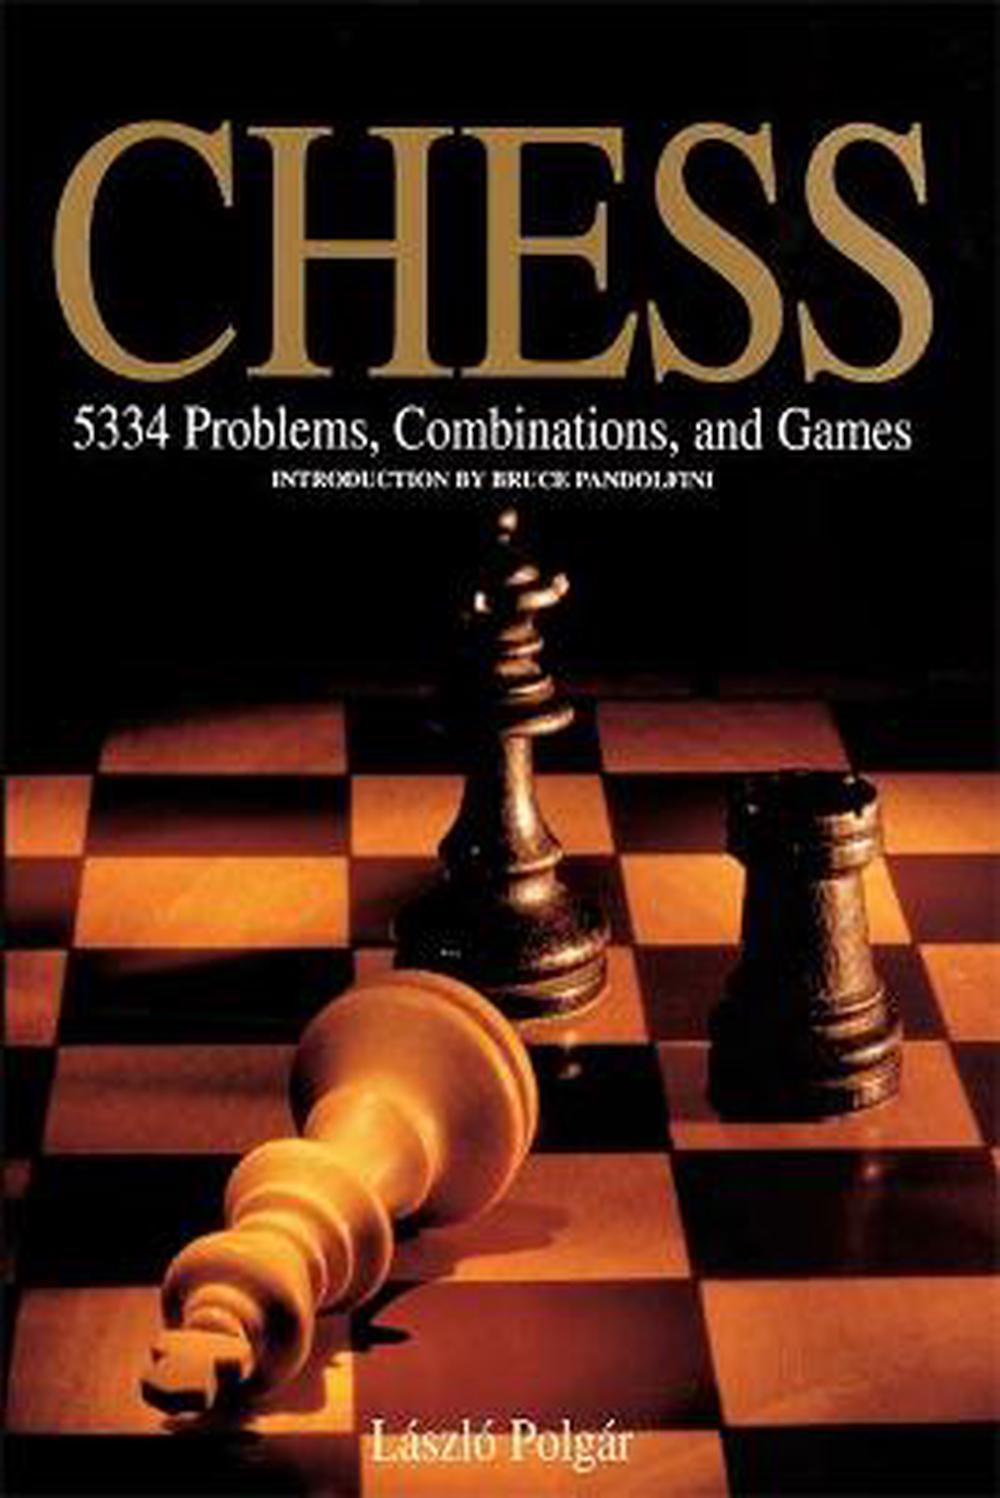 Chess 5334 Problems, Combinations, and Games by Laszlo Polgar